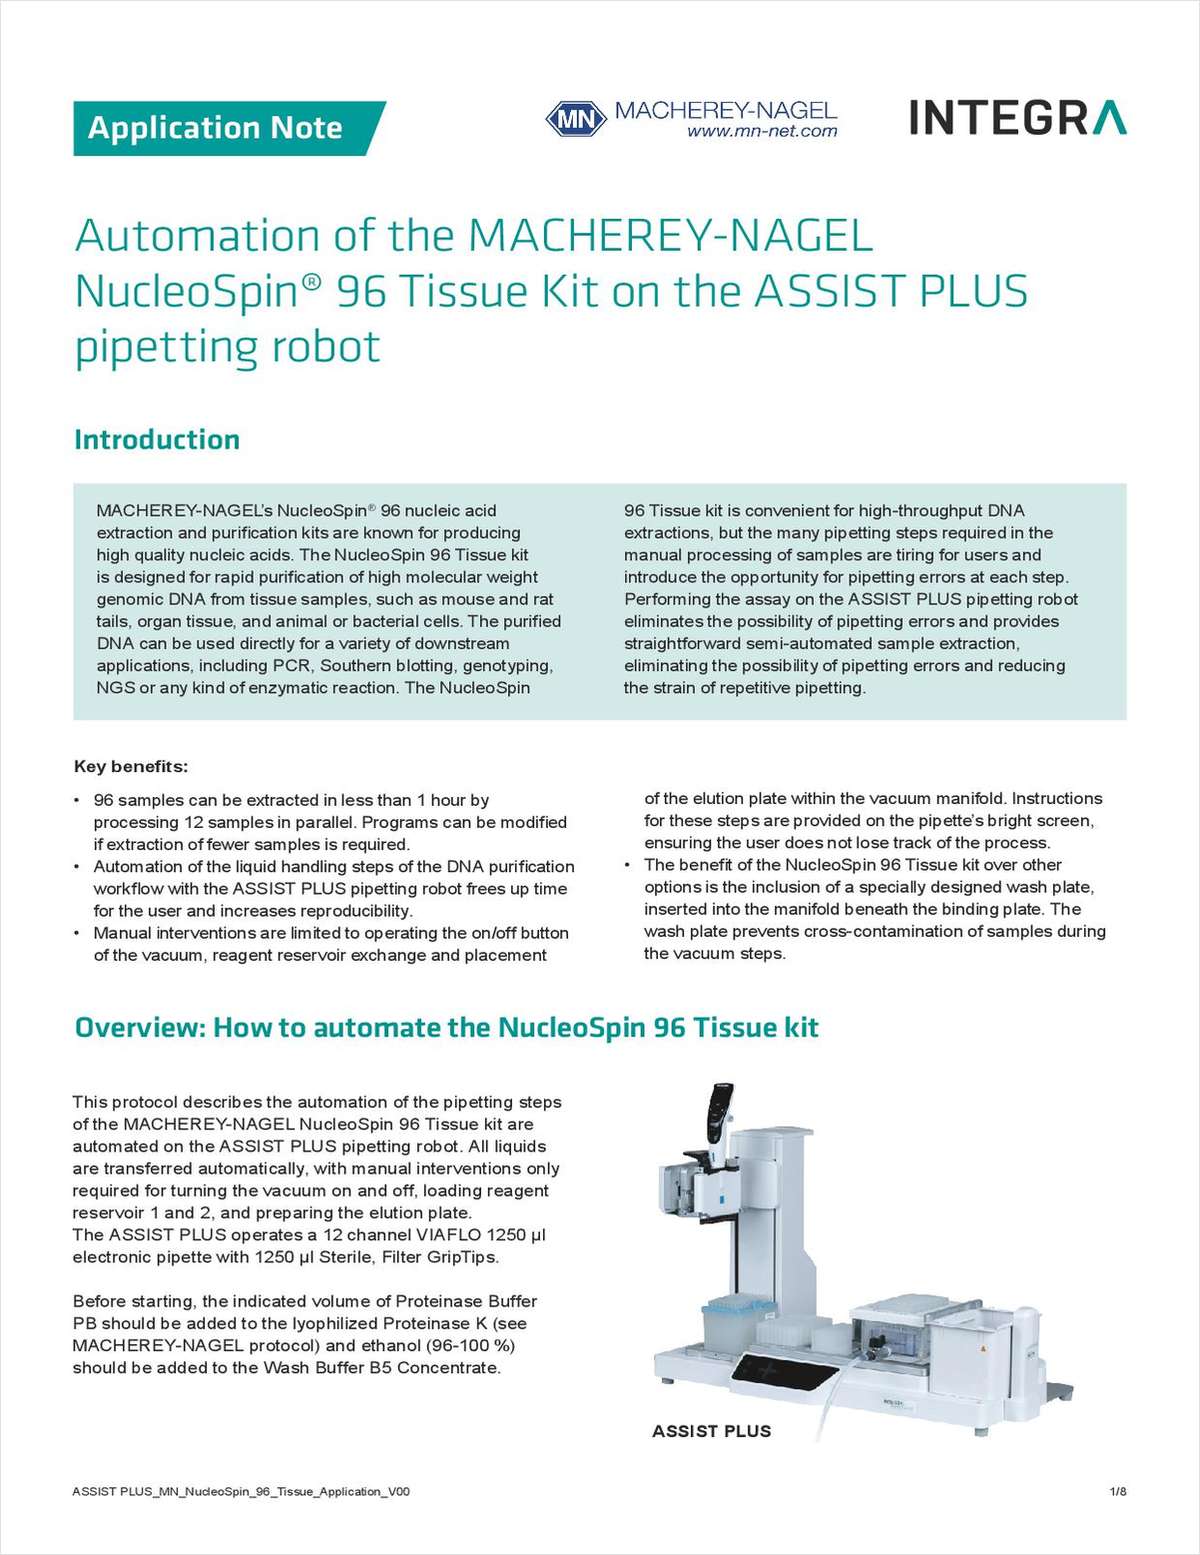 Automation of the Macherey-Nagel NucleoSpin 96 Tissue Kit on the Assist Plus Pipetting Robot